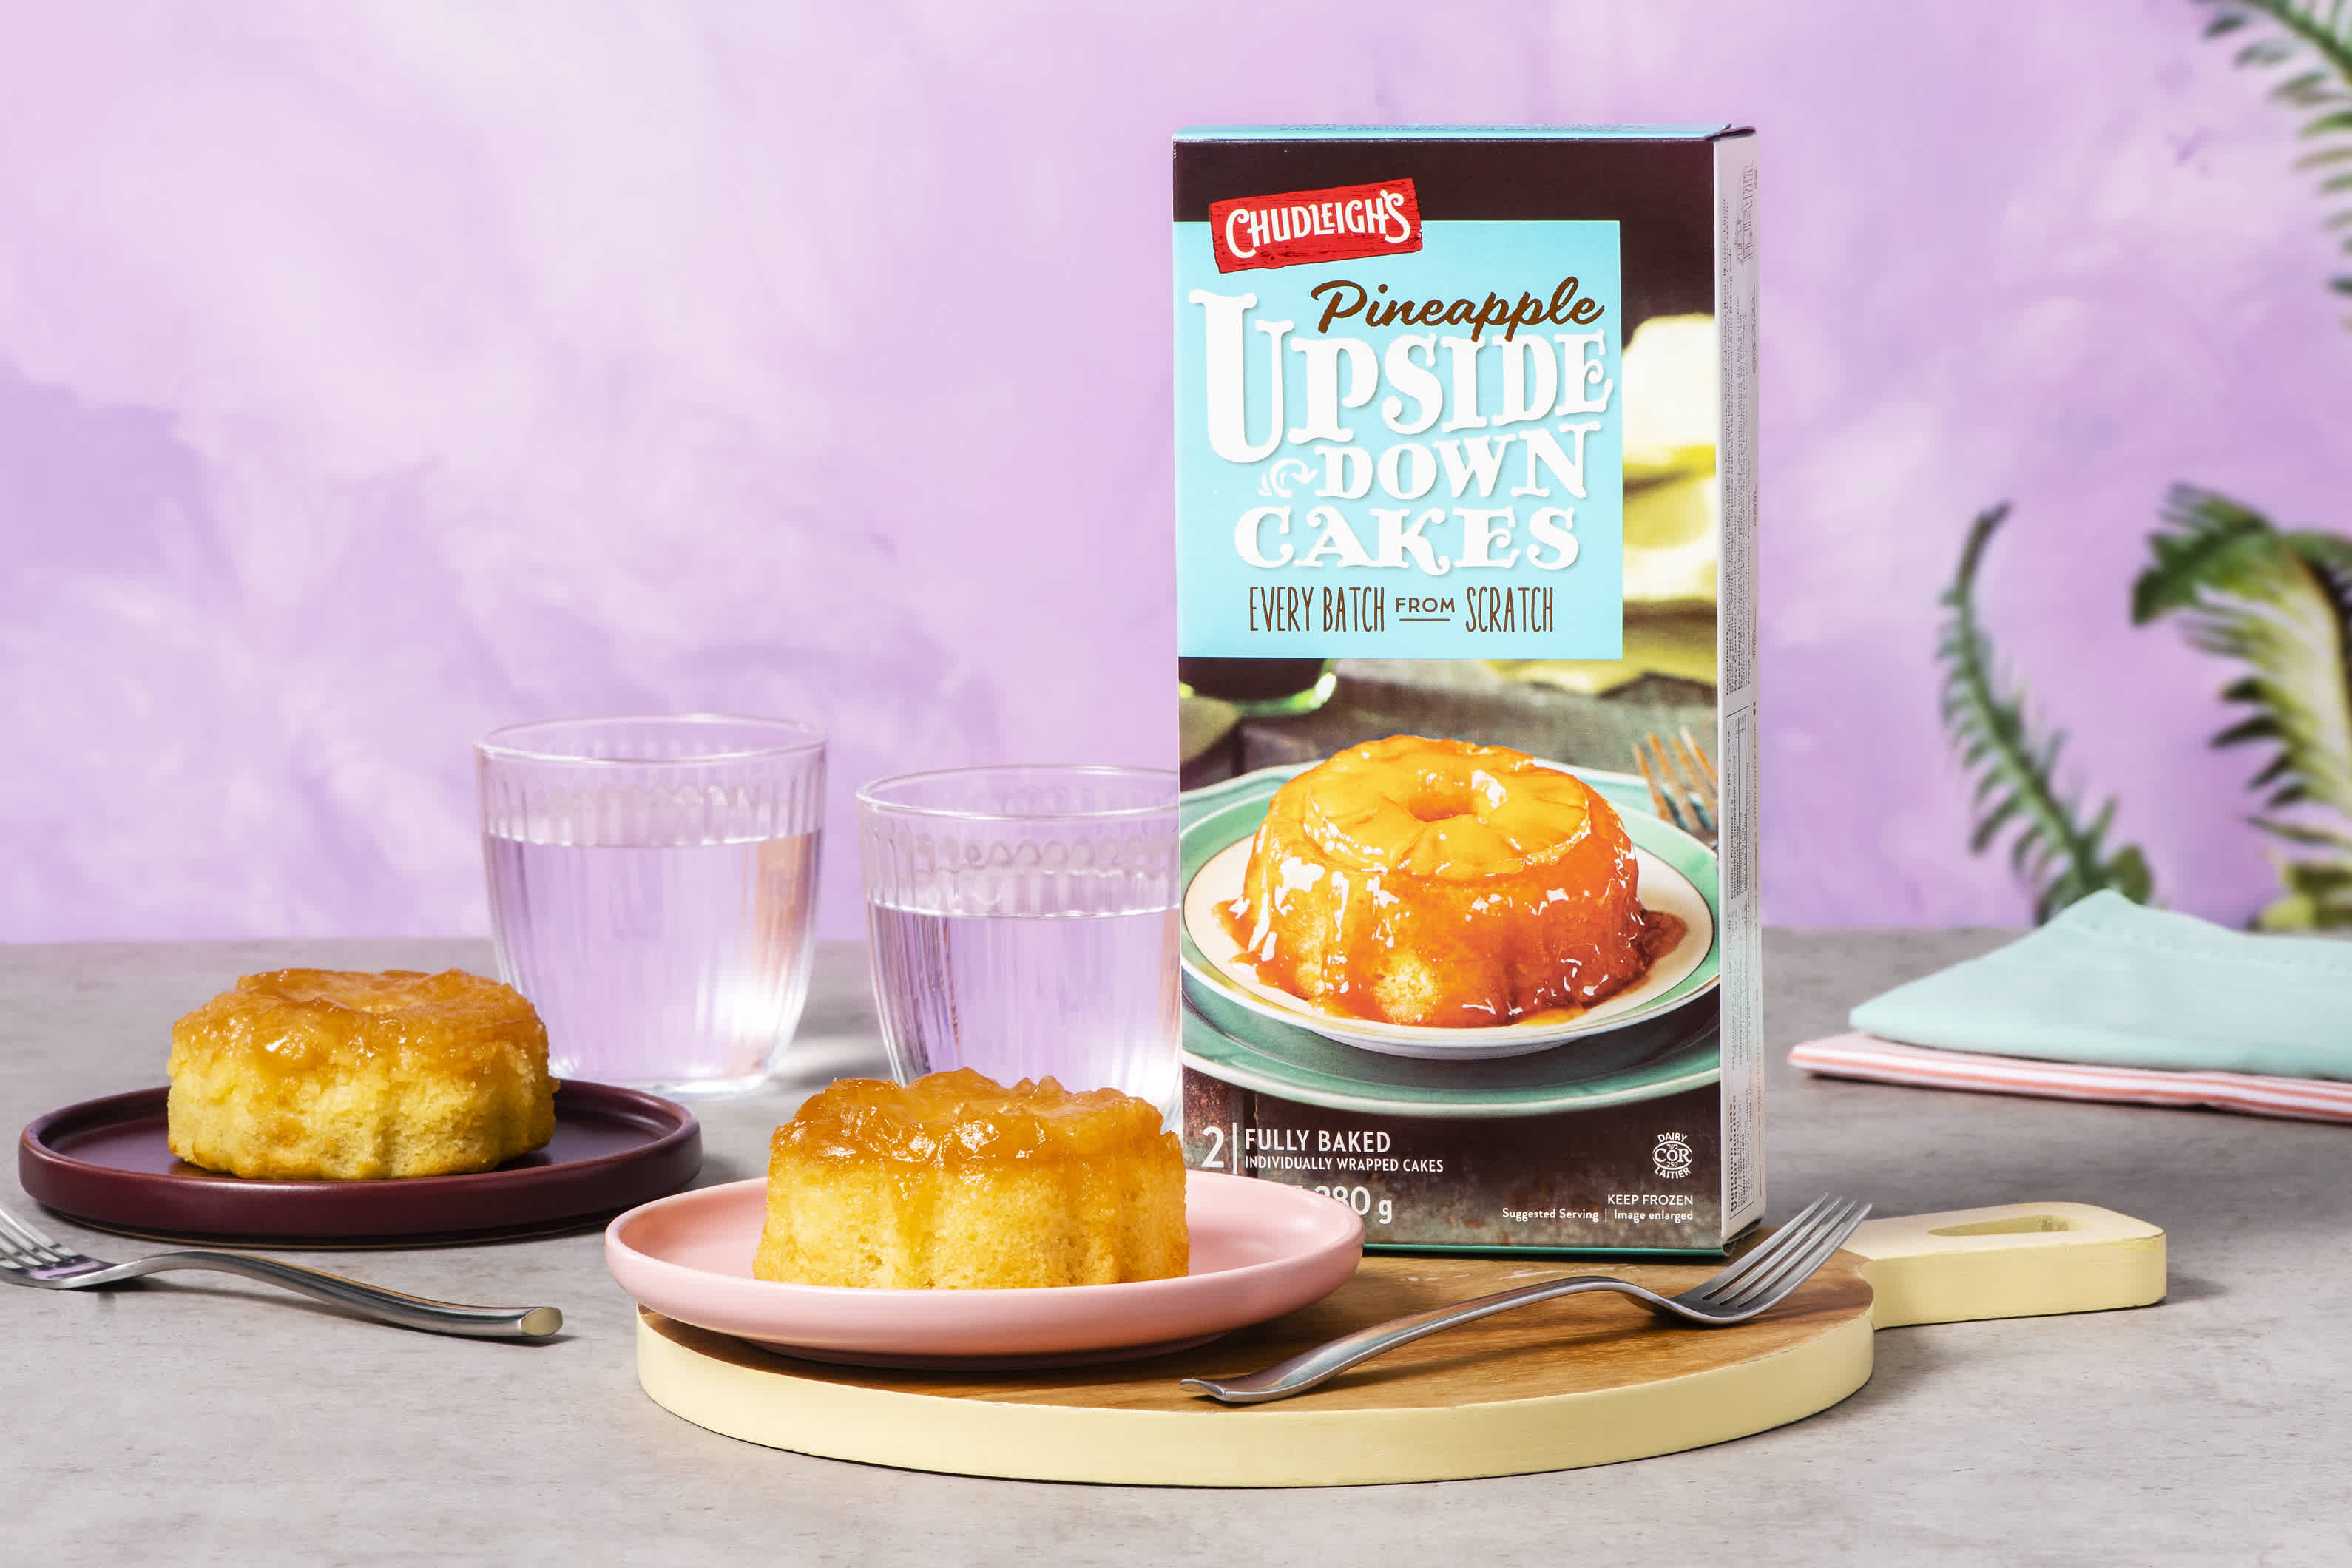 Chudleigh's Pineapple Upside-Down Cakes